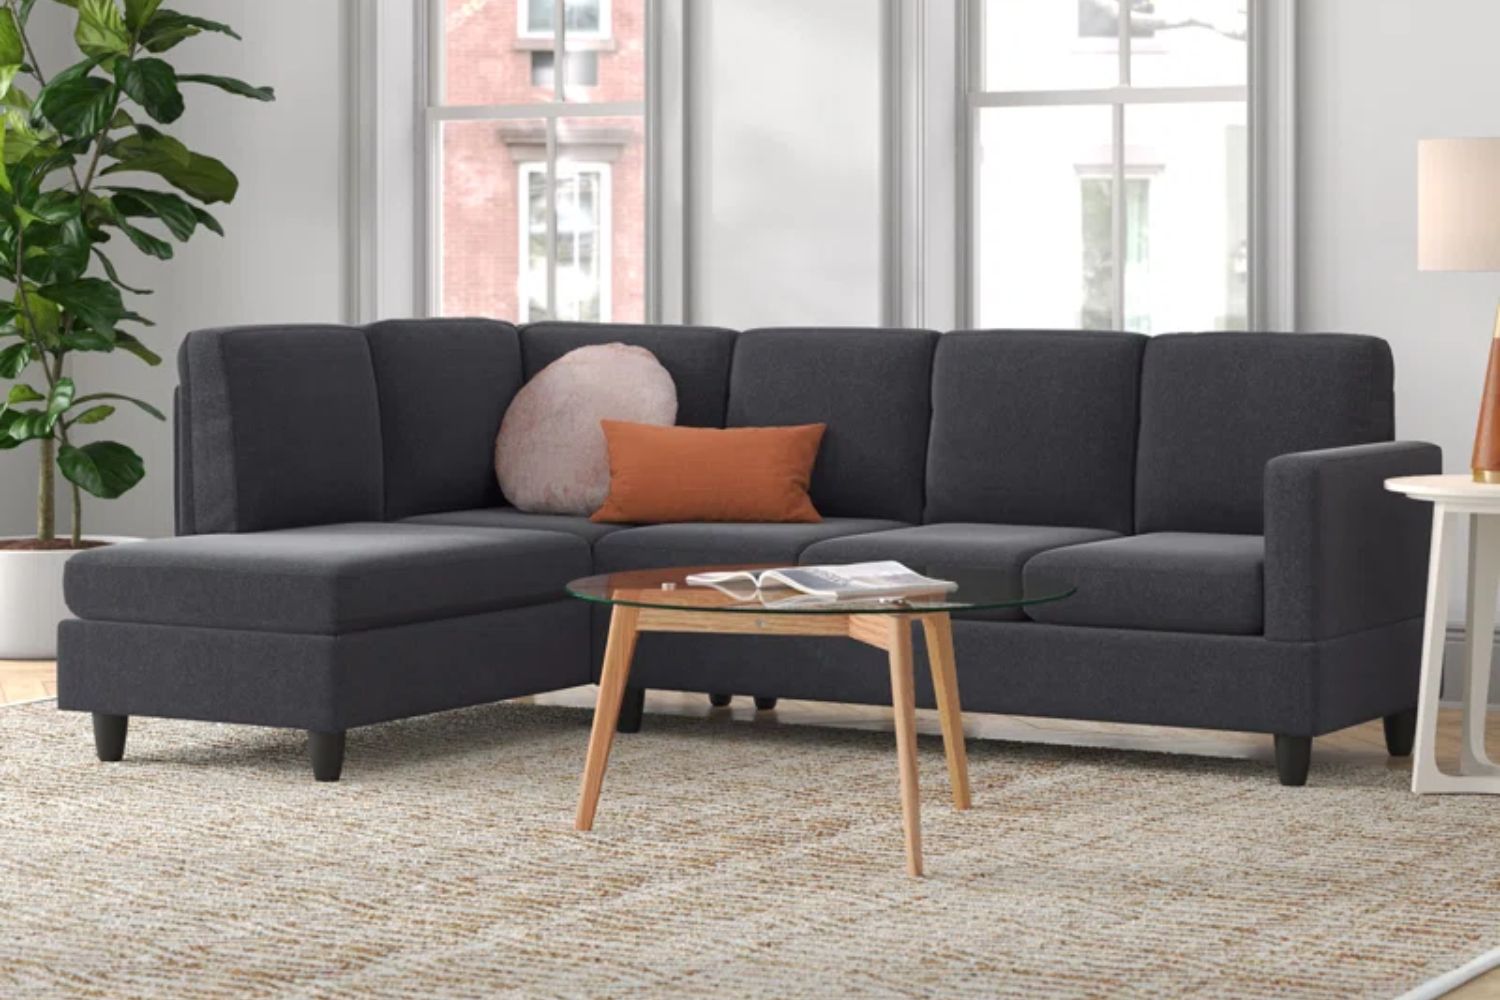 The Best Couches Under 1000 Options: Mercury Row Renner Sectional